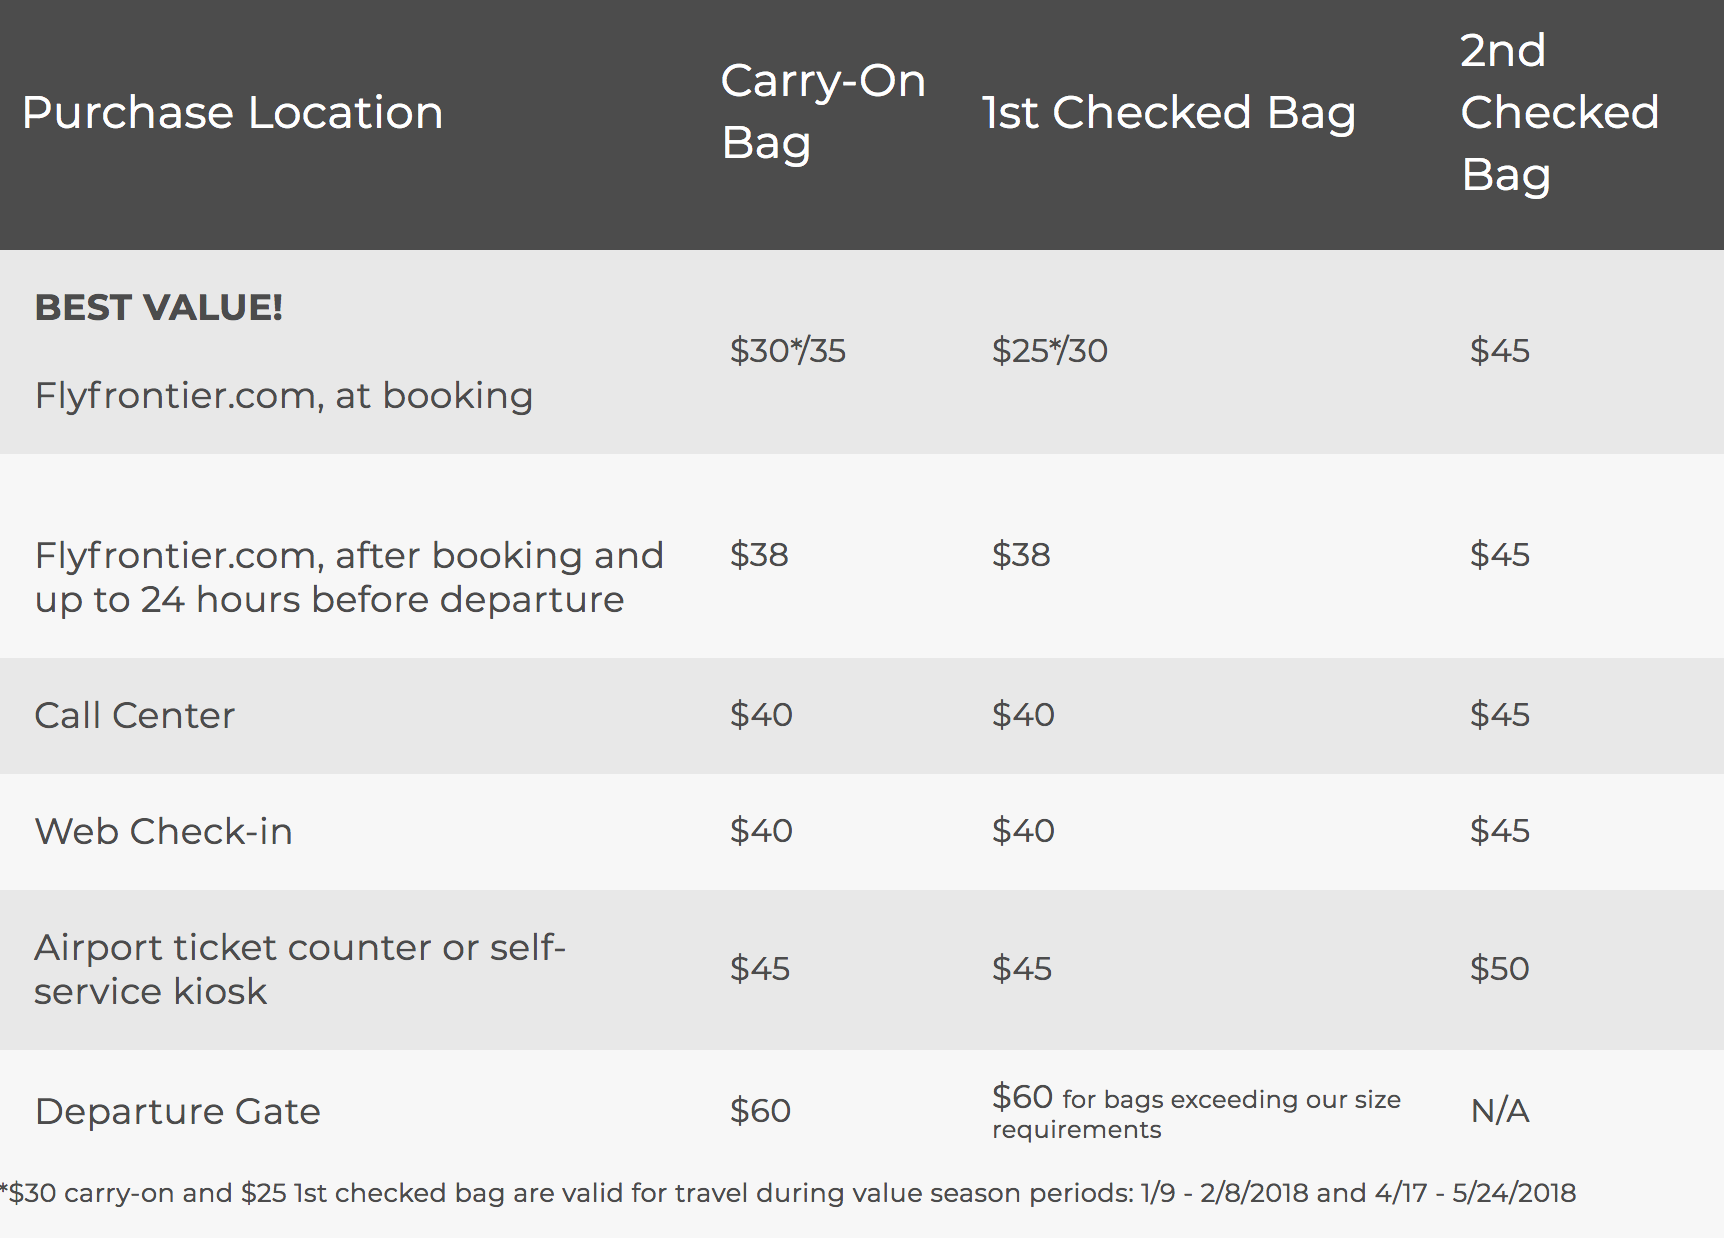 Note how Frontier charges less for a checked bag than a full-size carry on. 